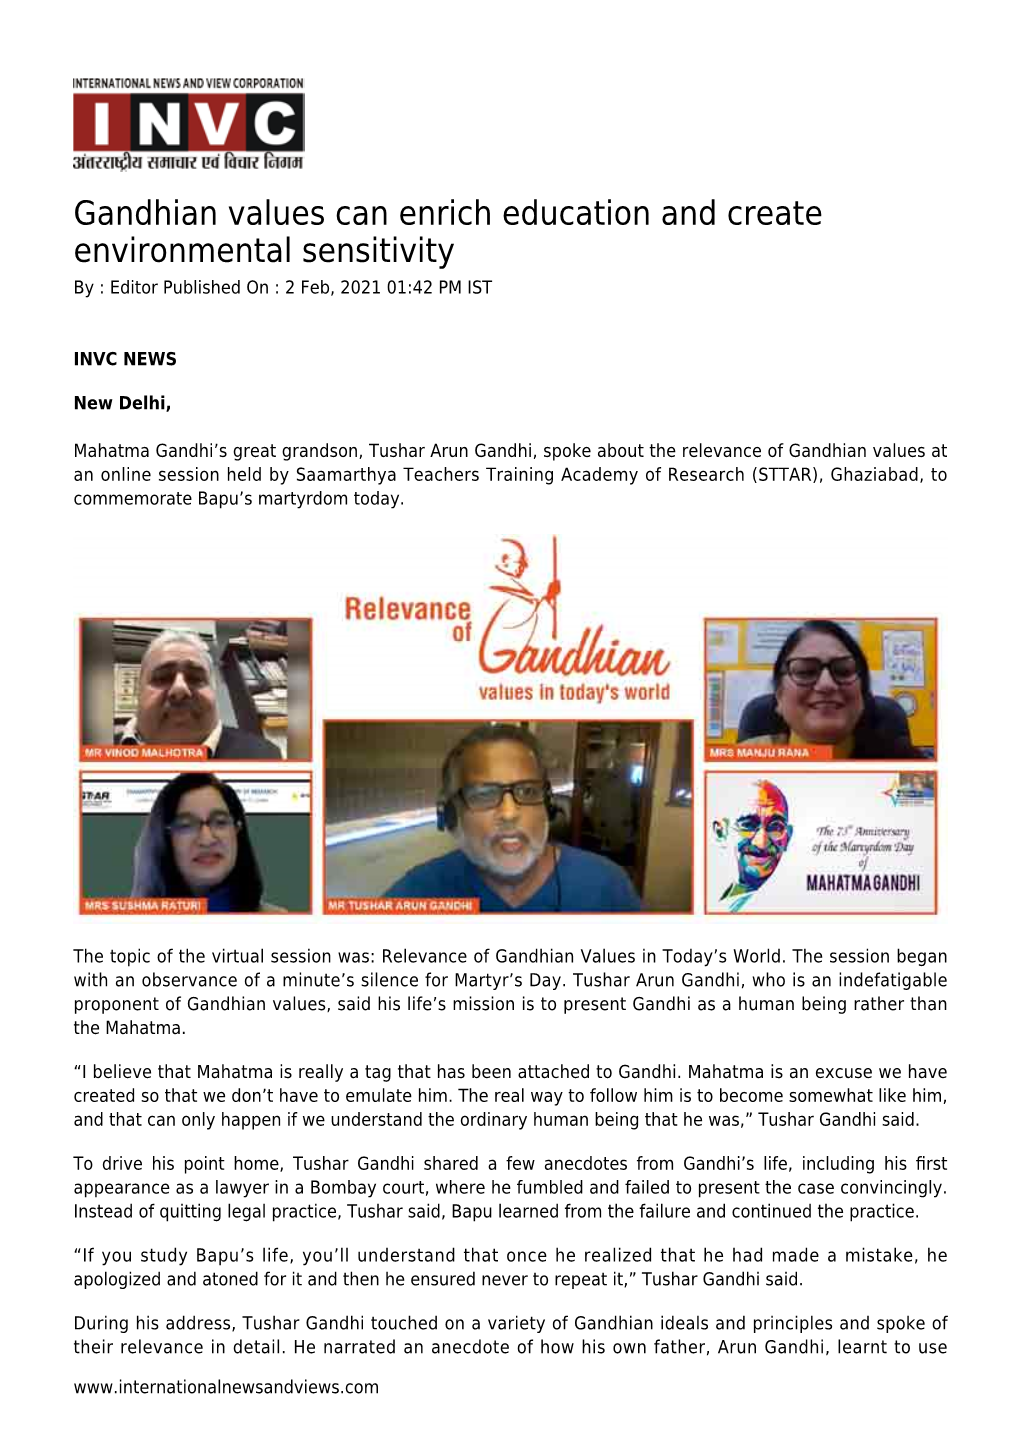 Gandhian Values Can Enrich Education and Create Environmental Sensitivity by : Editor Published on : 2 Feb, 2021 01:42 PM IST